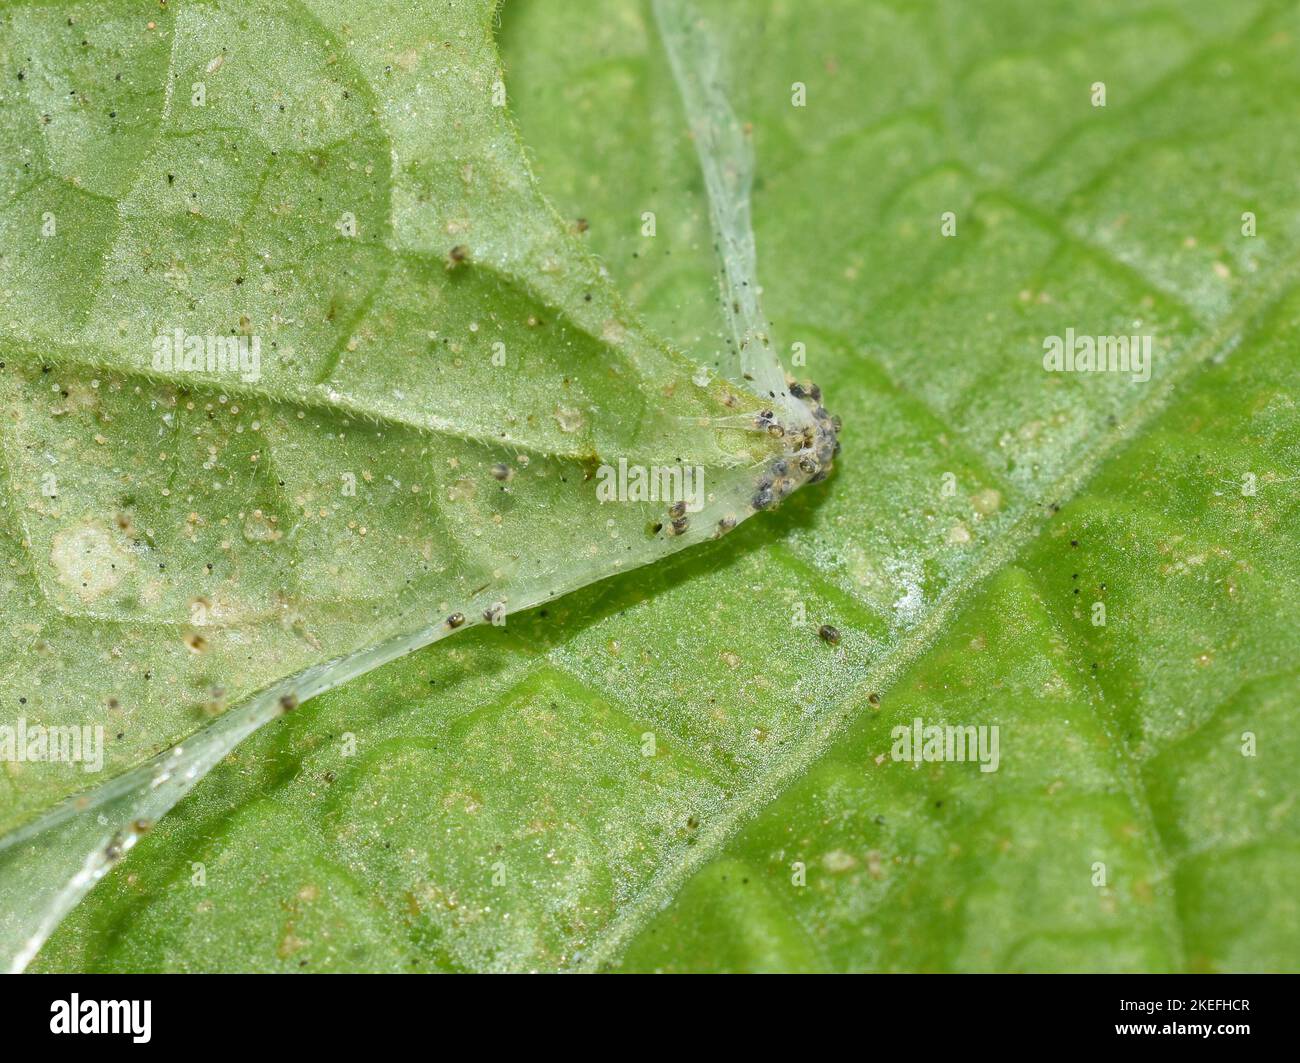 Leaf heavily infected by two-spotted spider mite Tetranychus urticae greenhouse pest mite Stock Photo